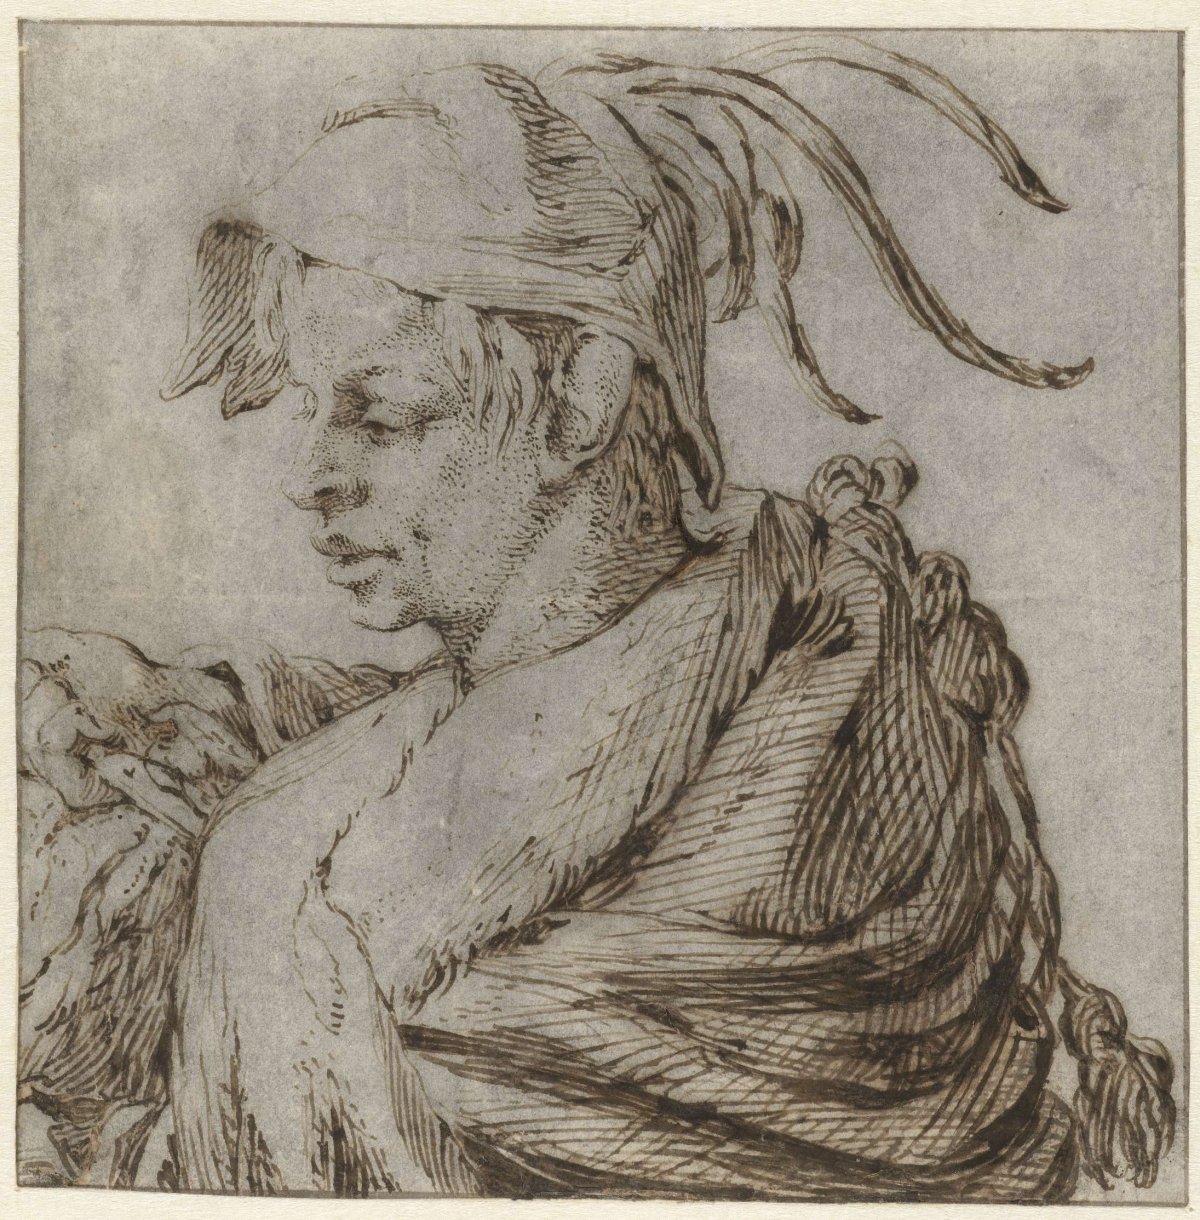 A Boy with a Feathered Hat, Jacques de Gheyn (III), c. 1616 - c. 1641